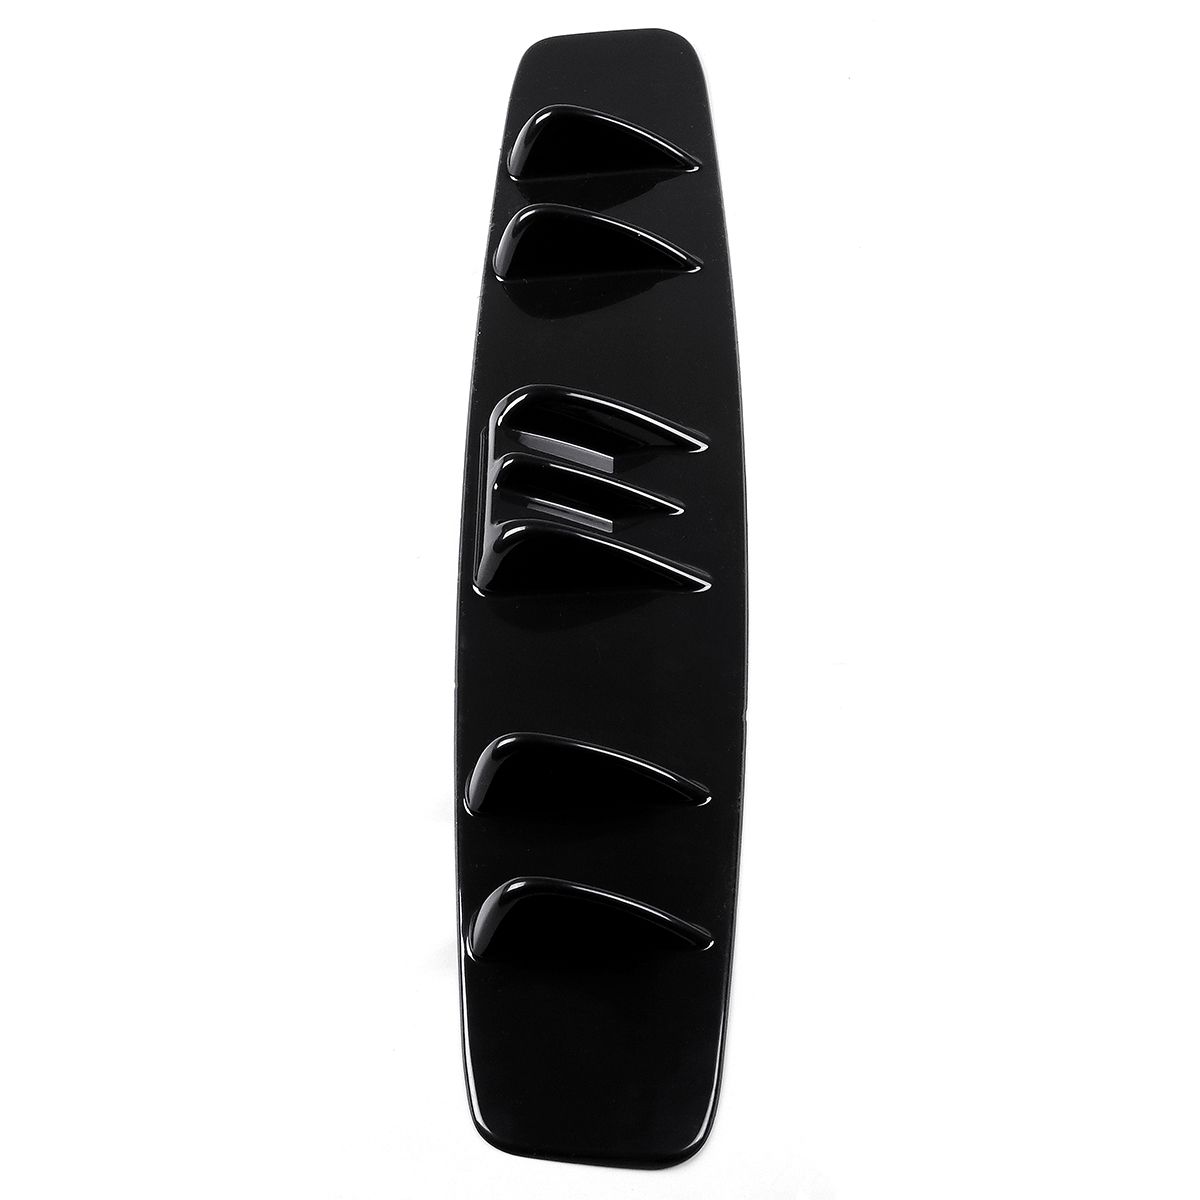 Glossy-Black-Car-ABS-Rear-Style-Curved-Bumper-Protector-Lip-Diffuser-1459899